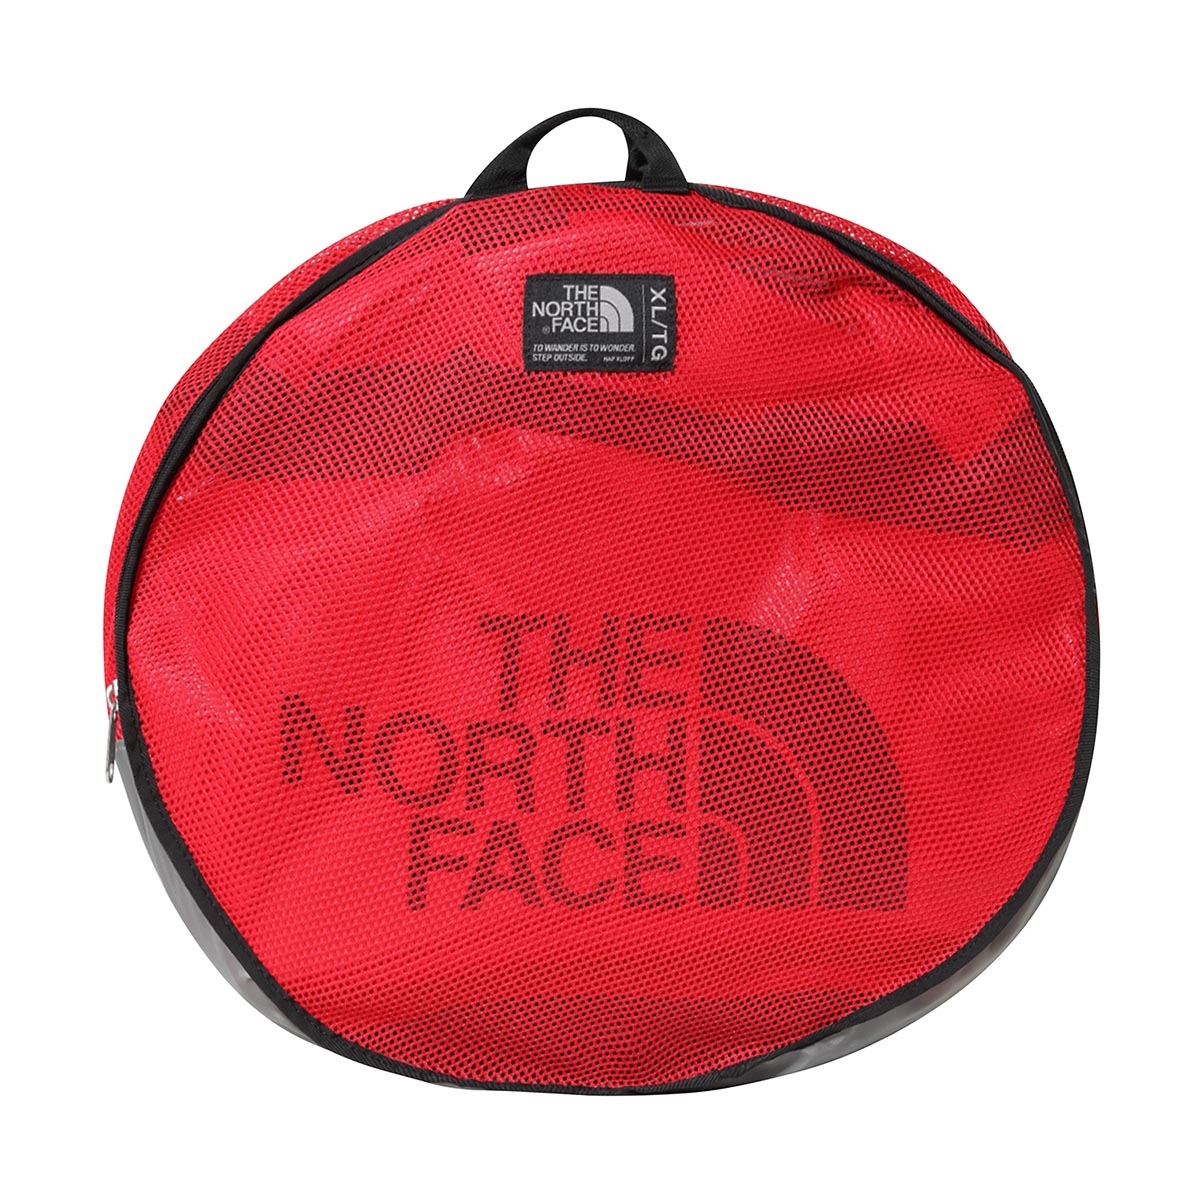 THE NORTH FACE - BASE CAMP DUFFEL - XLARGE - 132 L